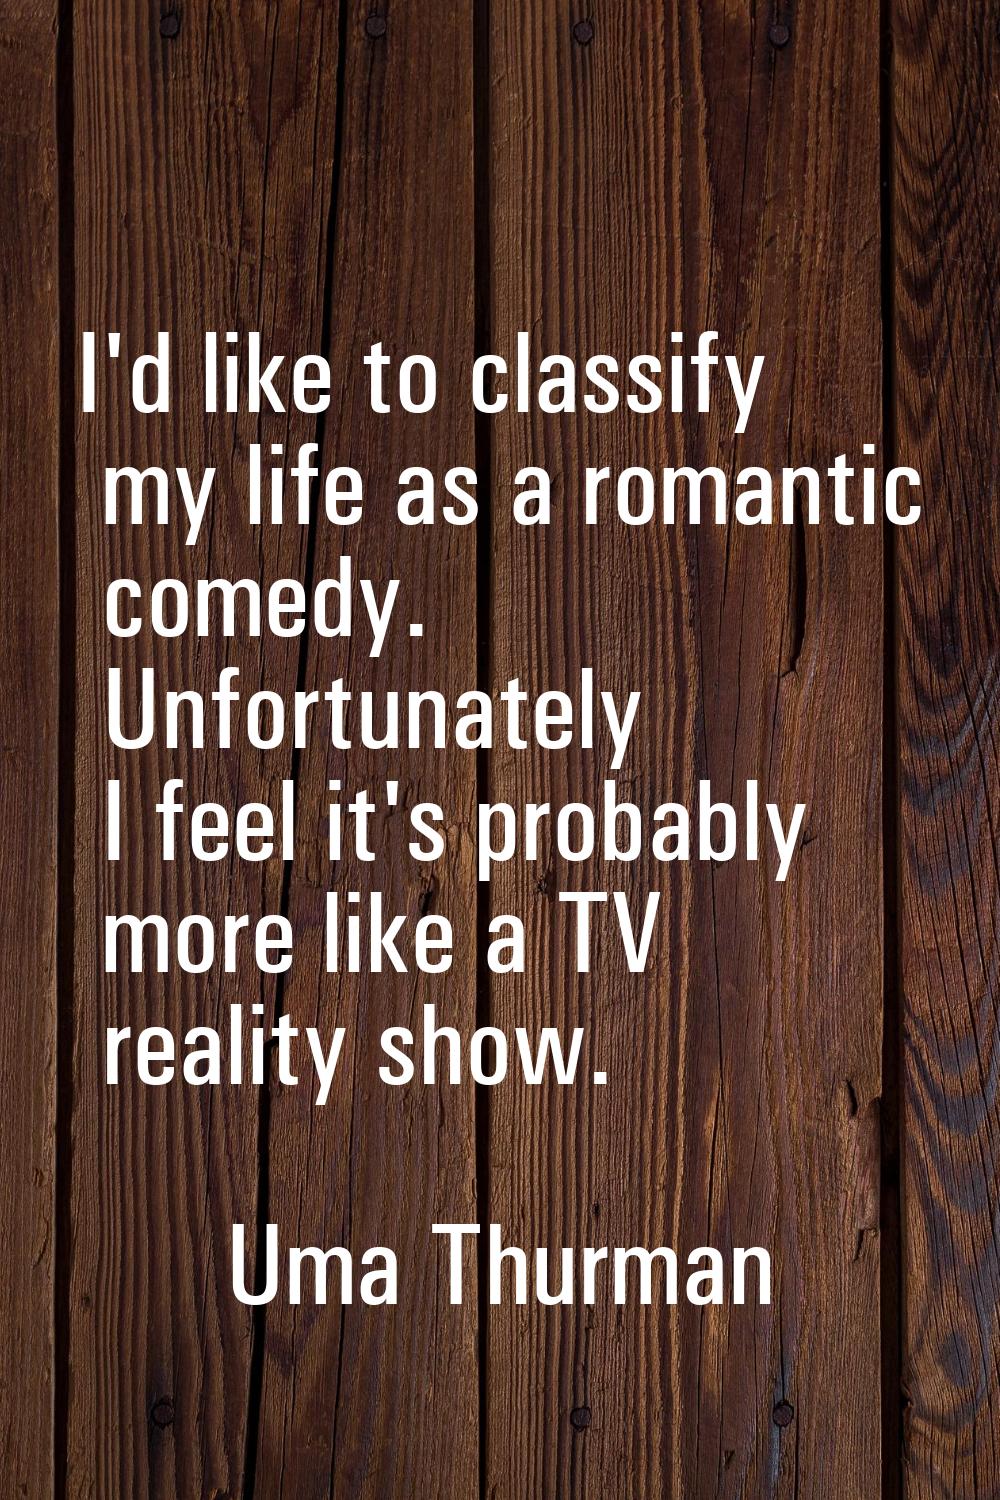 I'd like to classify my life as a romantic comedy. Unfortunately I feel it's probably more like a T